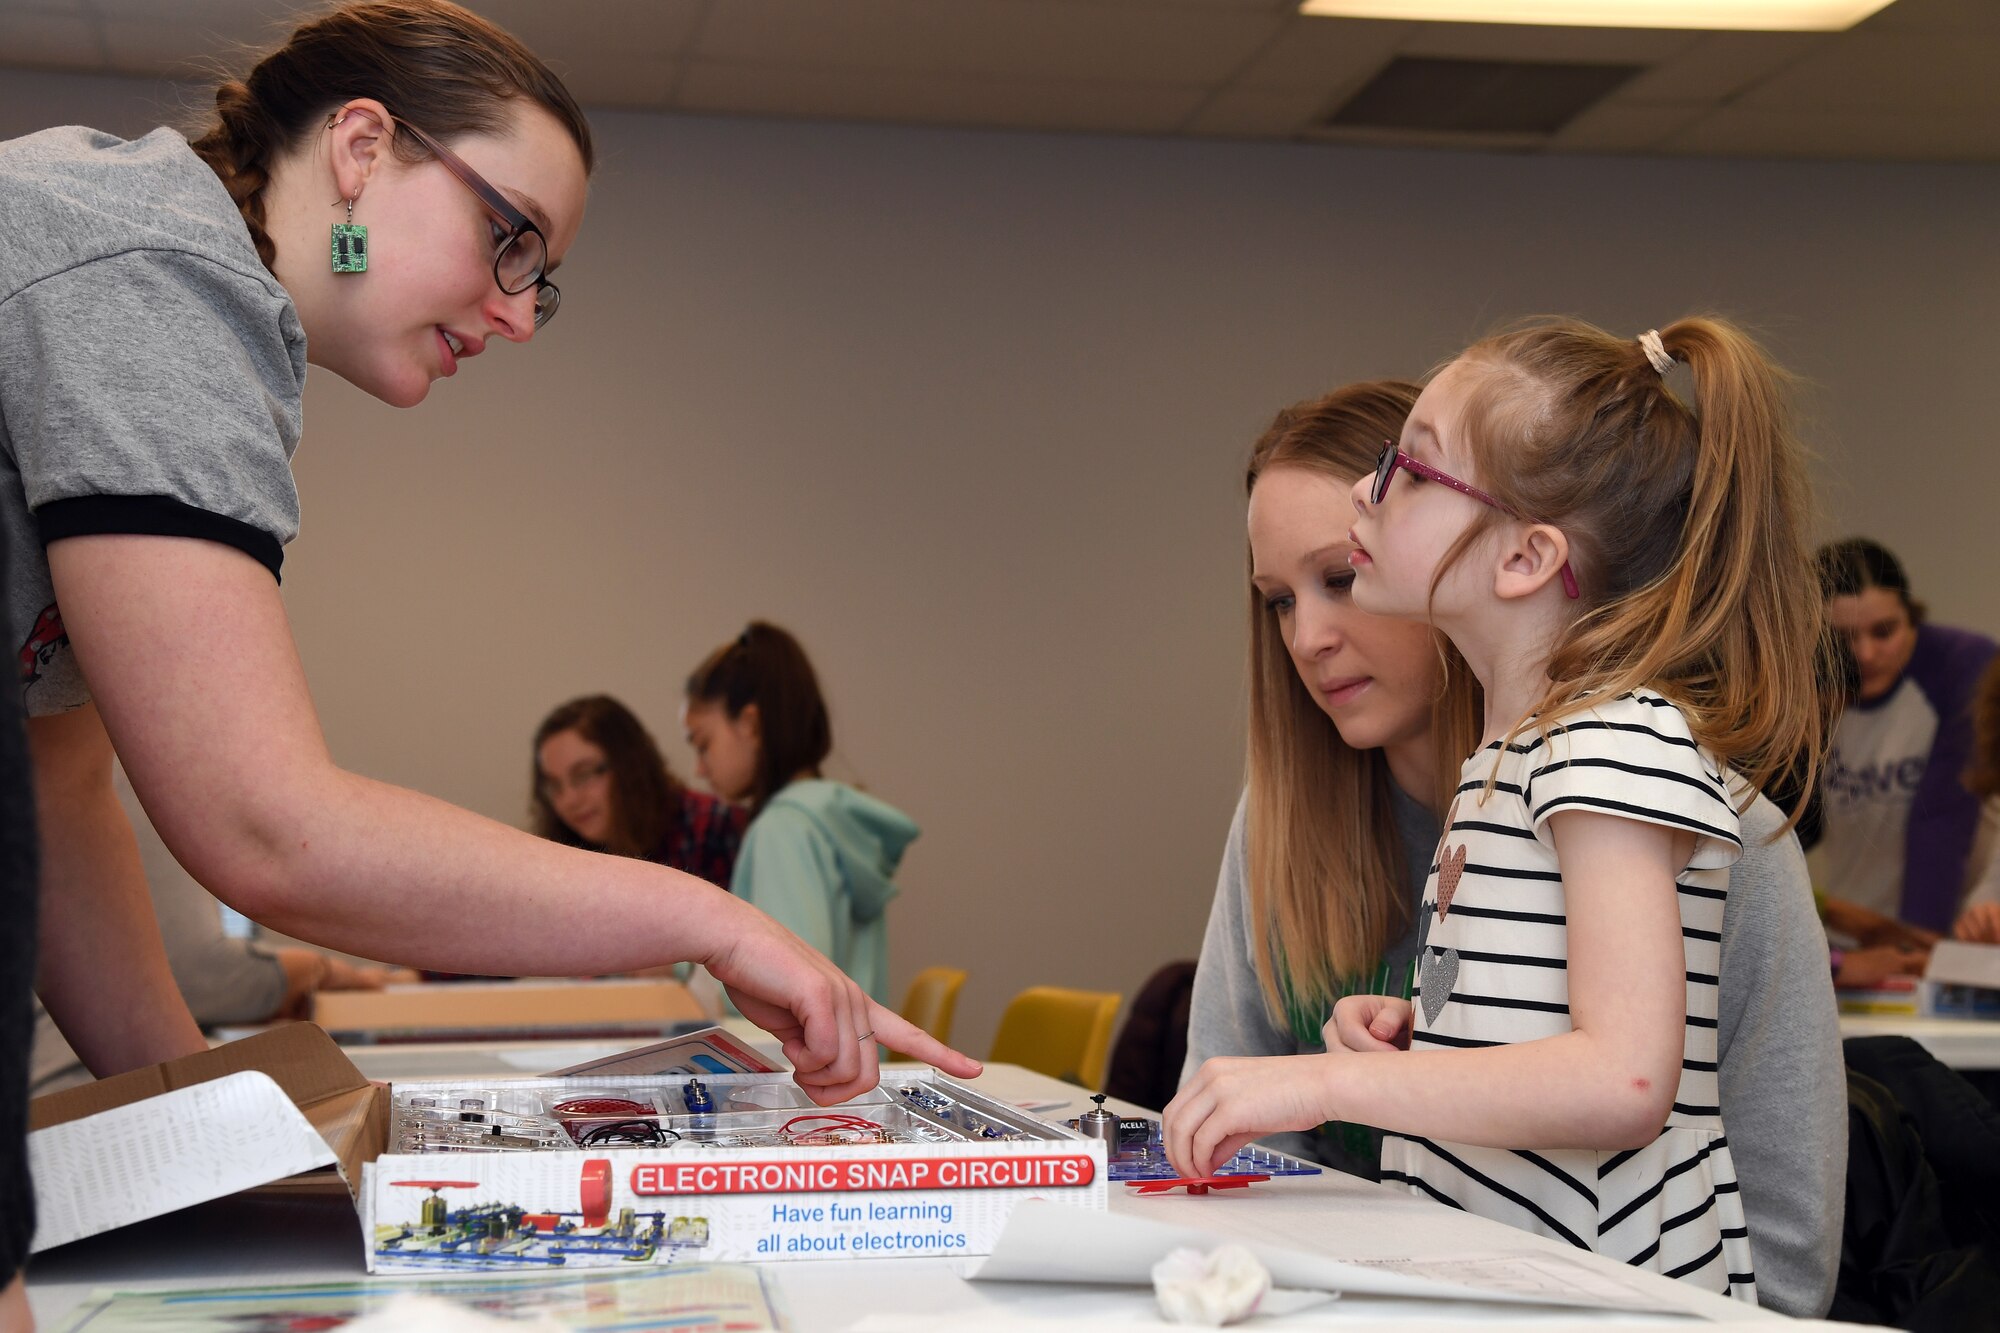 Lucy Praska, 6, listens to the instructions given by a volunteer with the University of North Dakota Society of Women Engineers during an experiment using electronic snap circuits at a science, technology, engineering and mathematics workshop January 26, 2019, in the Grand Forks Public Library. Praska attended the STEM workshop offered for mothers and daughters from Grand Forks Air Force Base, North Dakota, and the local community, and participated in a number of experiments to demonstrate mechanical, electrical and chemical engineering. (U.S. Air Force photo by Senior Airman Elora J. Martinez)